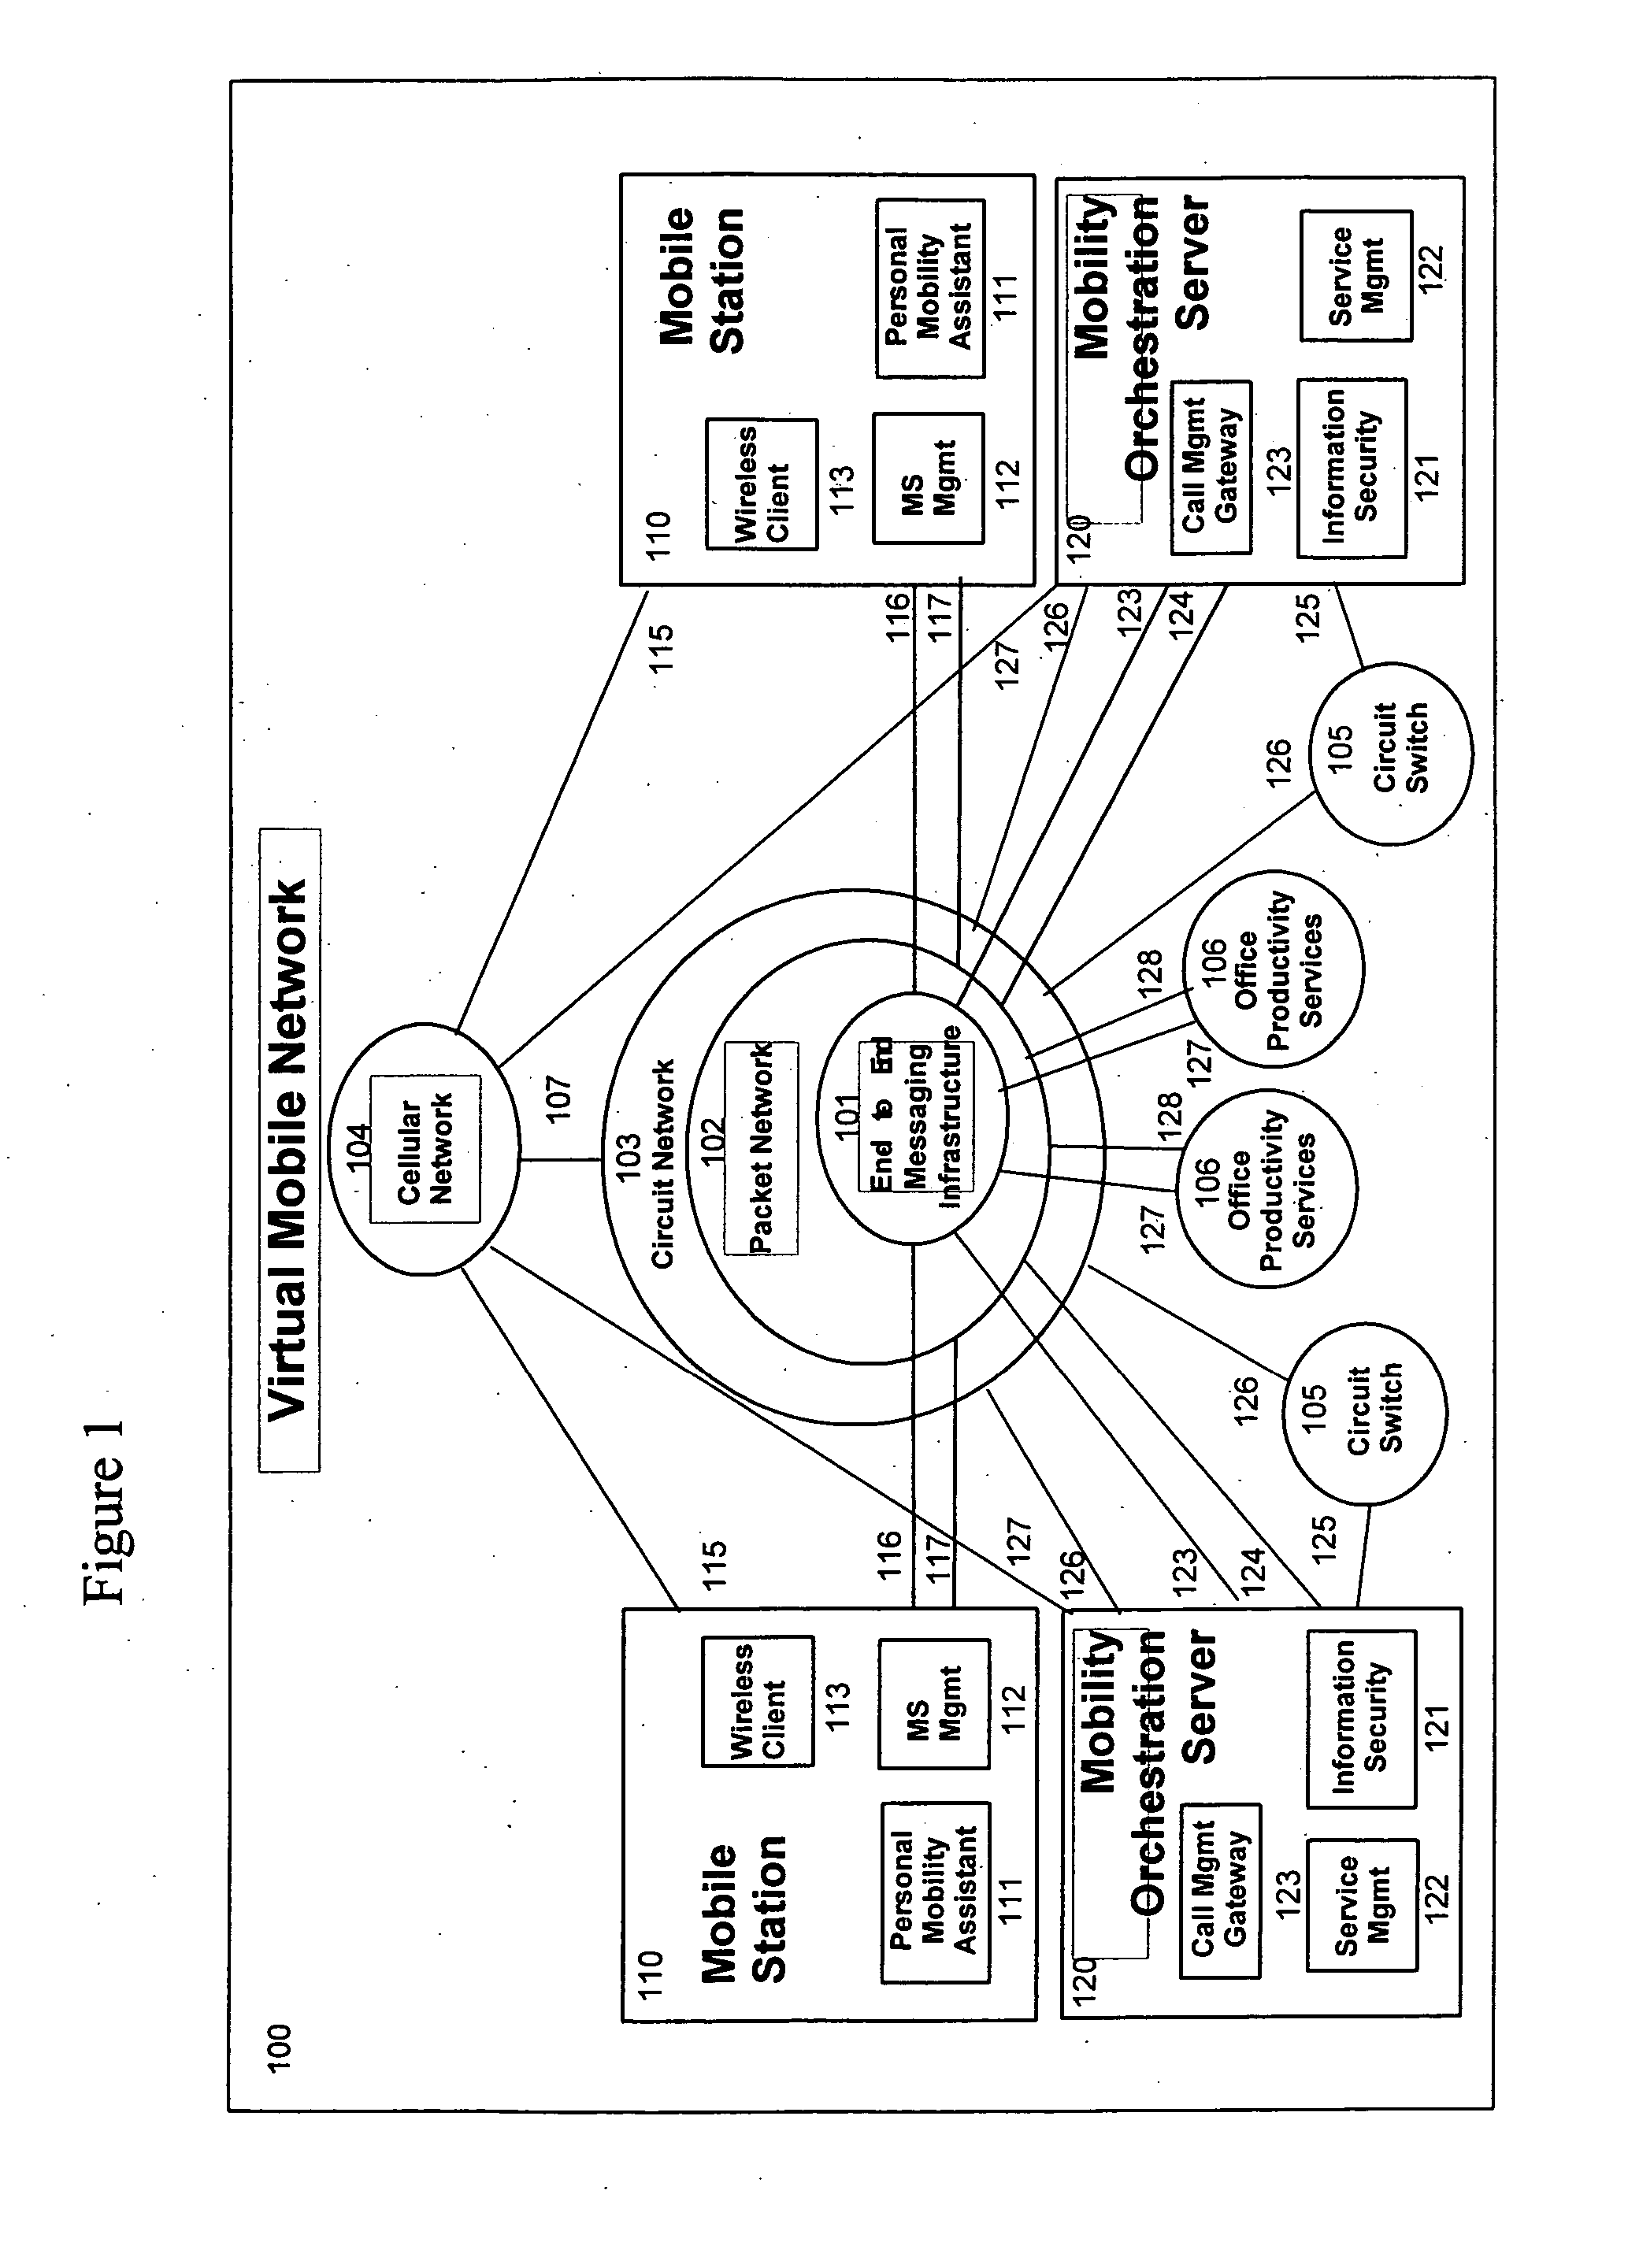 System and method for a virtual mobile network supporting dynamic personal virtual mobile network with multimedia service orchestration